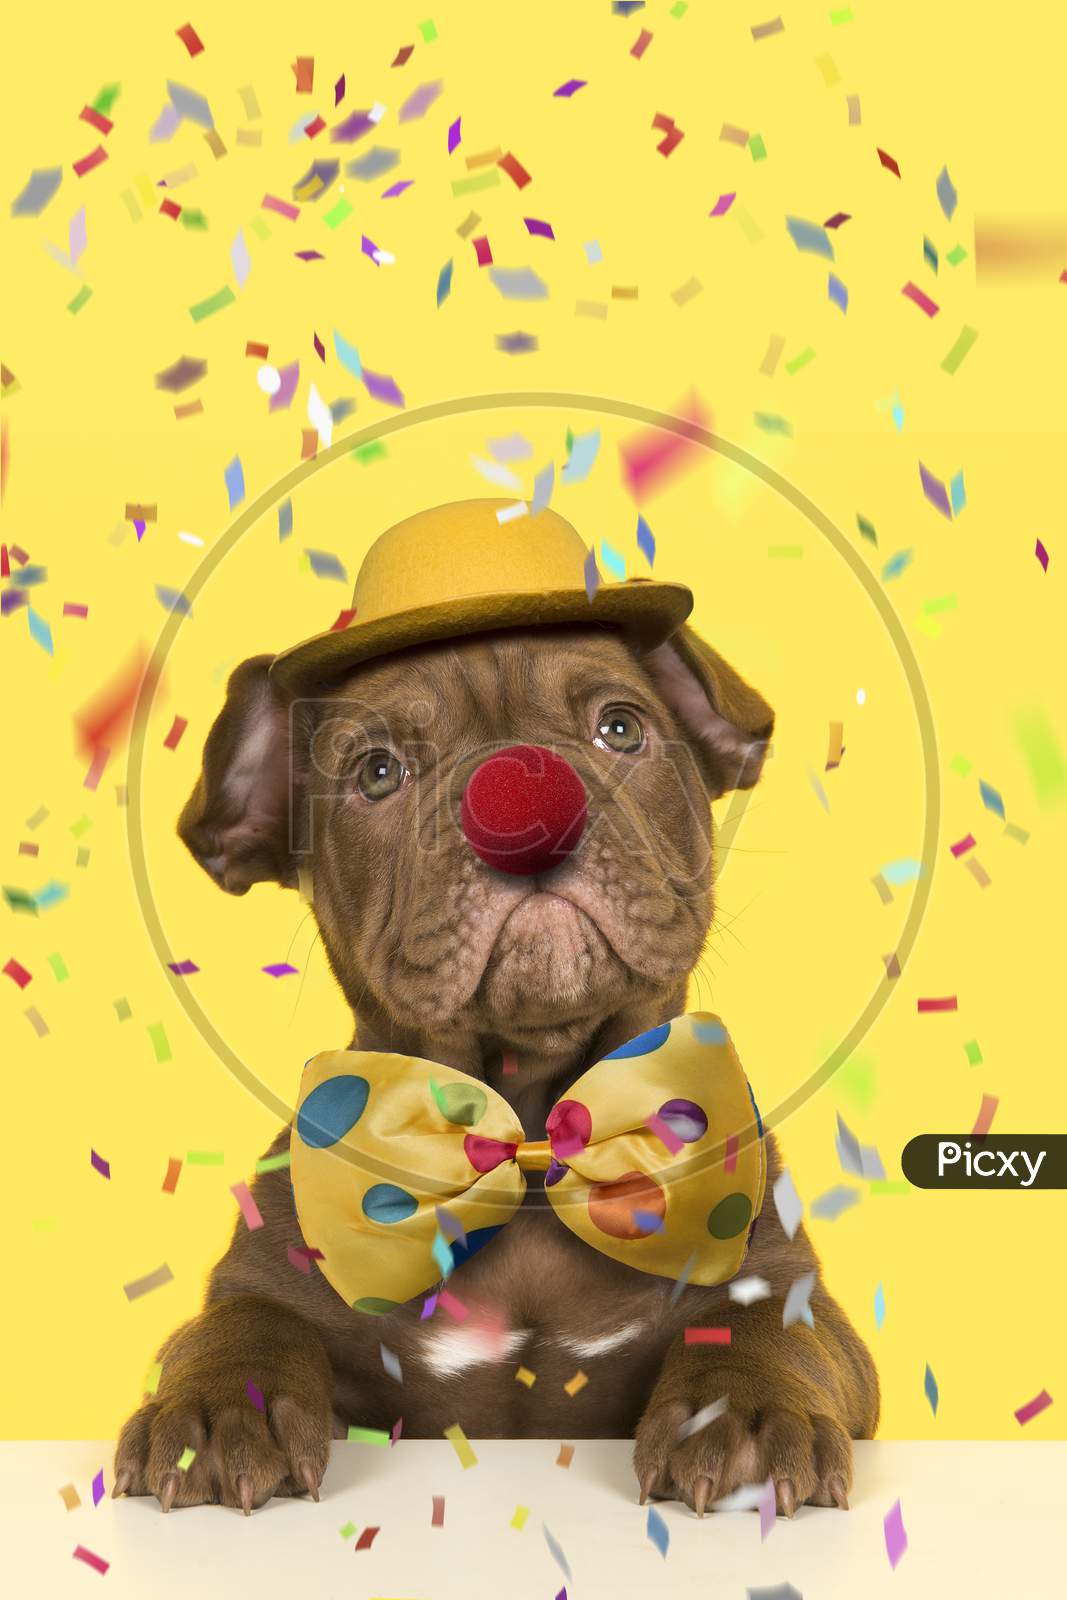 Cute Old English Bulldog Puppy Dressep Up As A Clown With Bow, Hat And A Red Nose On A Yellow Background With Confetti